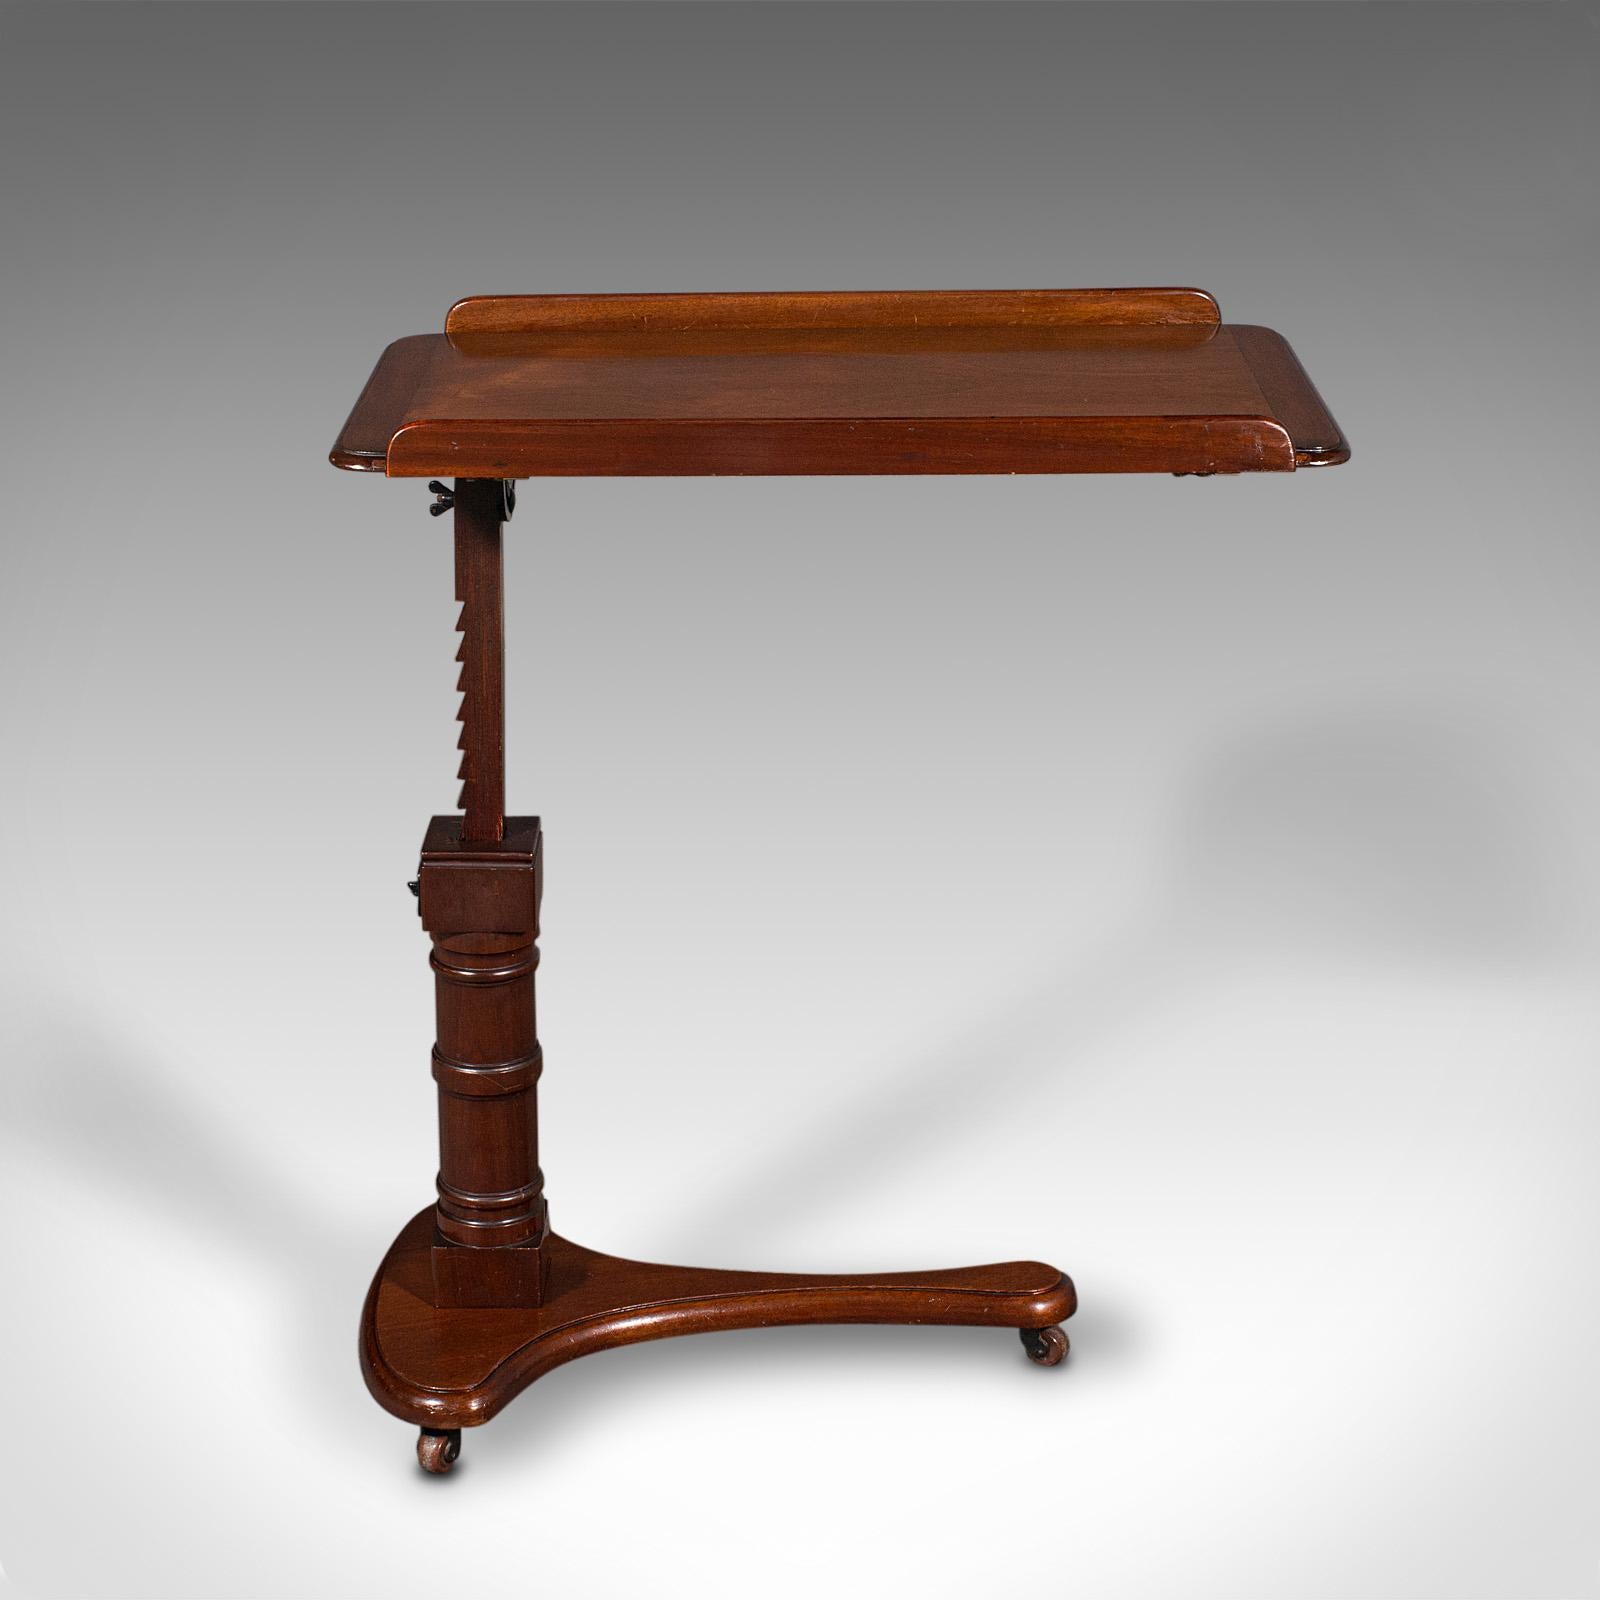 This is an antique adjustable reading table. An English, mahogany rotating lectern or recital stand, dating to the Edwardian period, circa 1910.

Offering a multitude of adjustment and versatile for differing uses
Displays a desirable aged patina